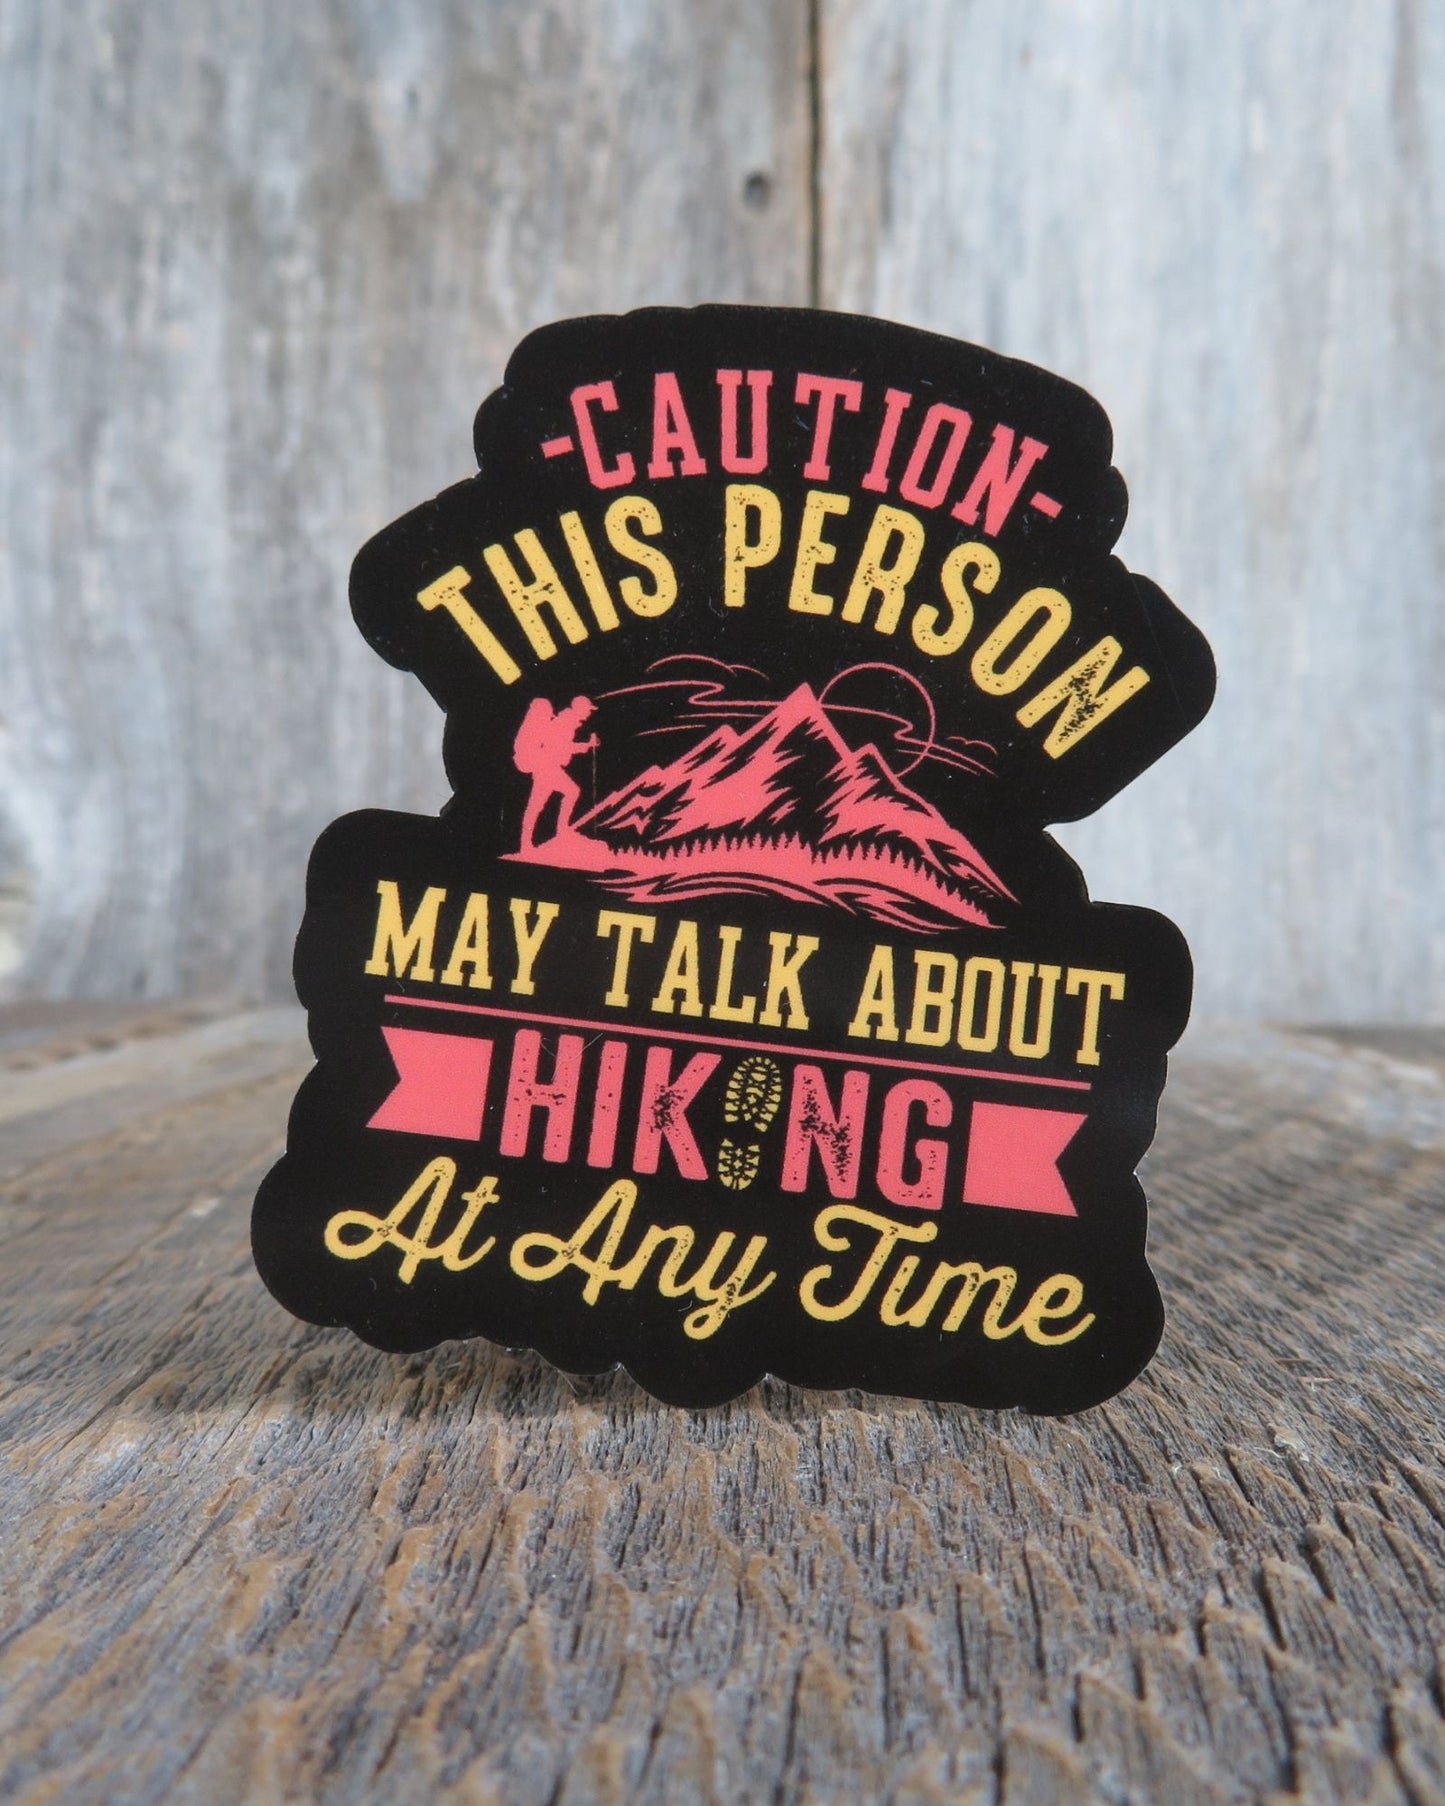 Caution This Person May Talk About Hiking Sticker Waterproof Orange Black Outdoors Nature Water Bottle Laptop Sticker